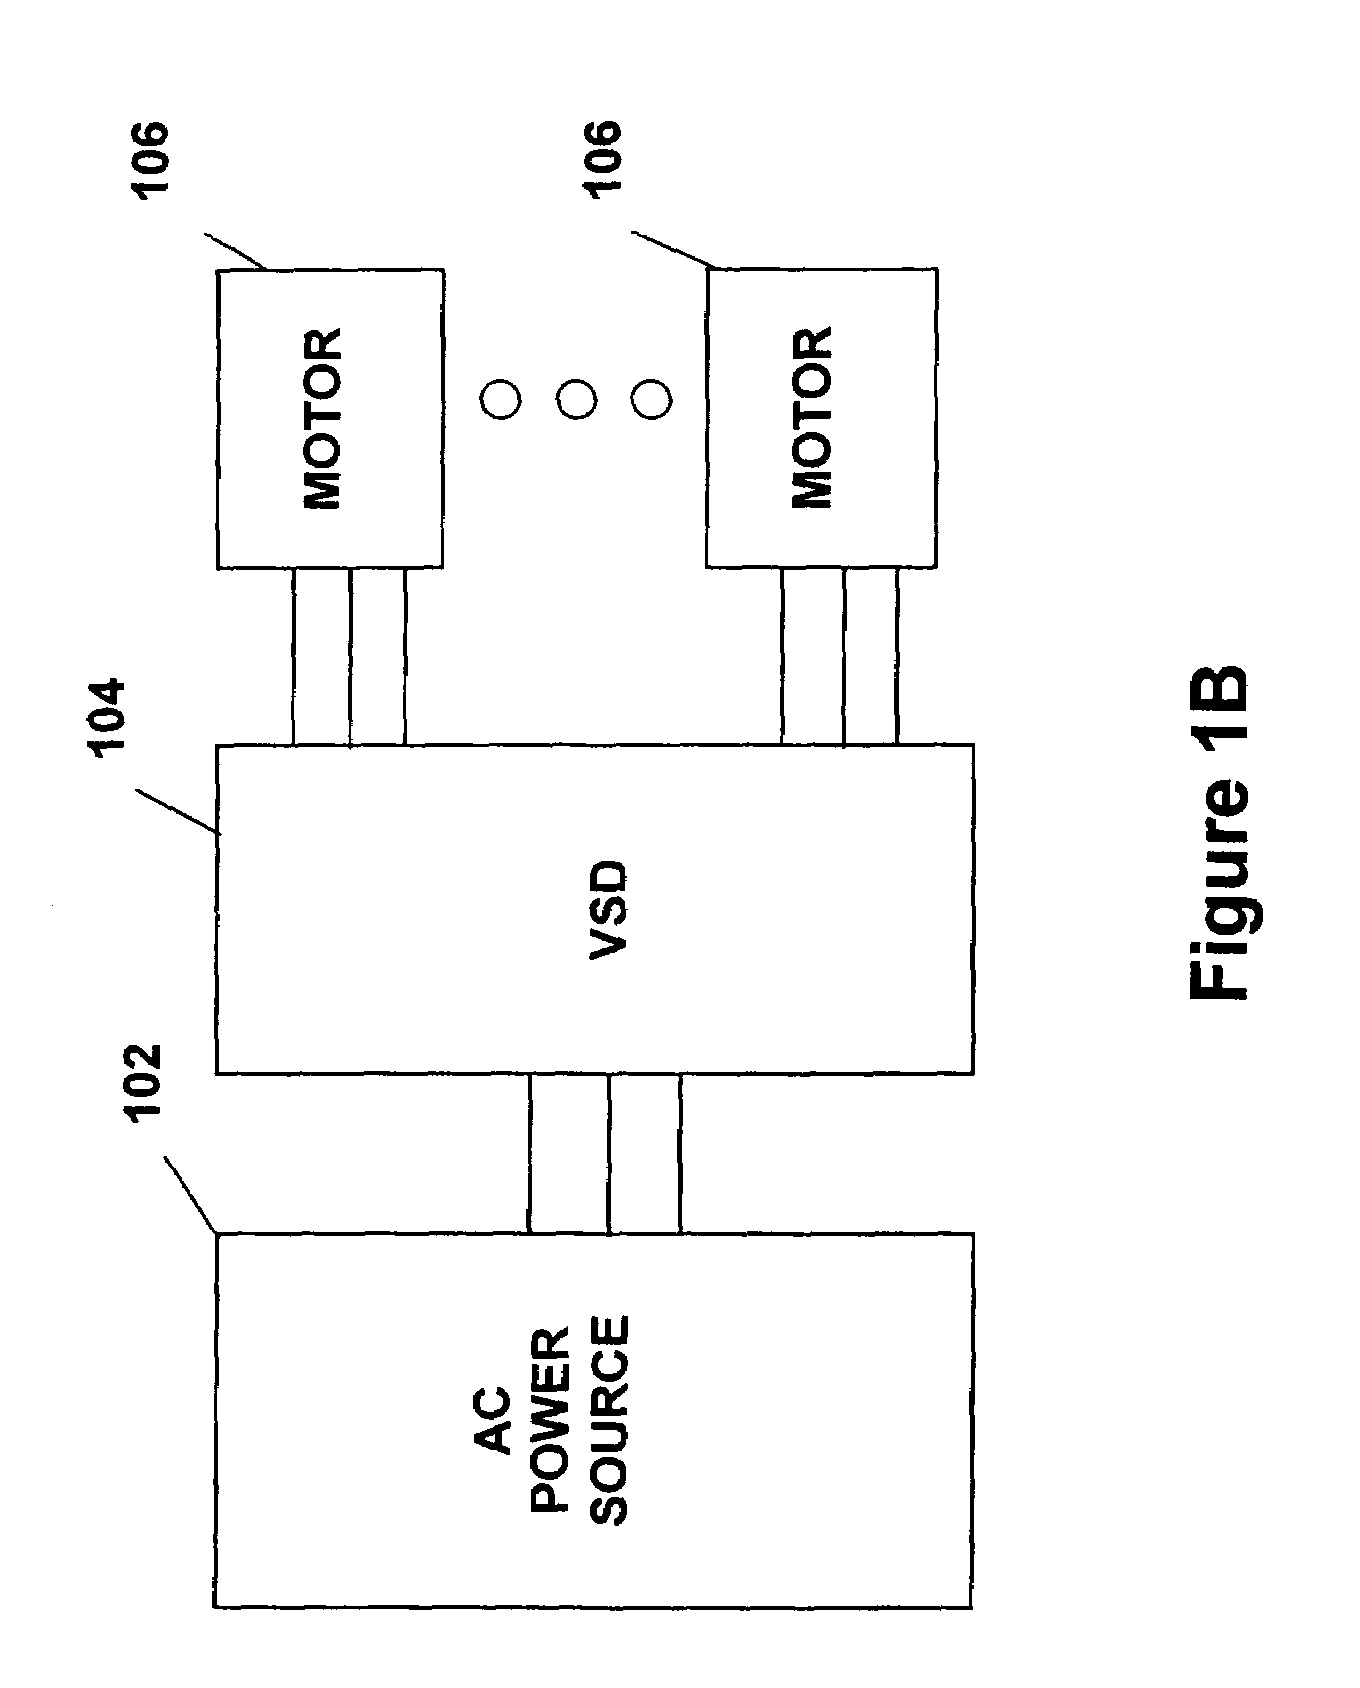 System for precharging a DC link in a variable speed drive